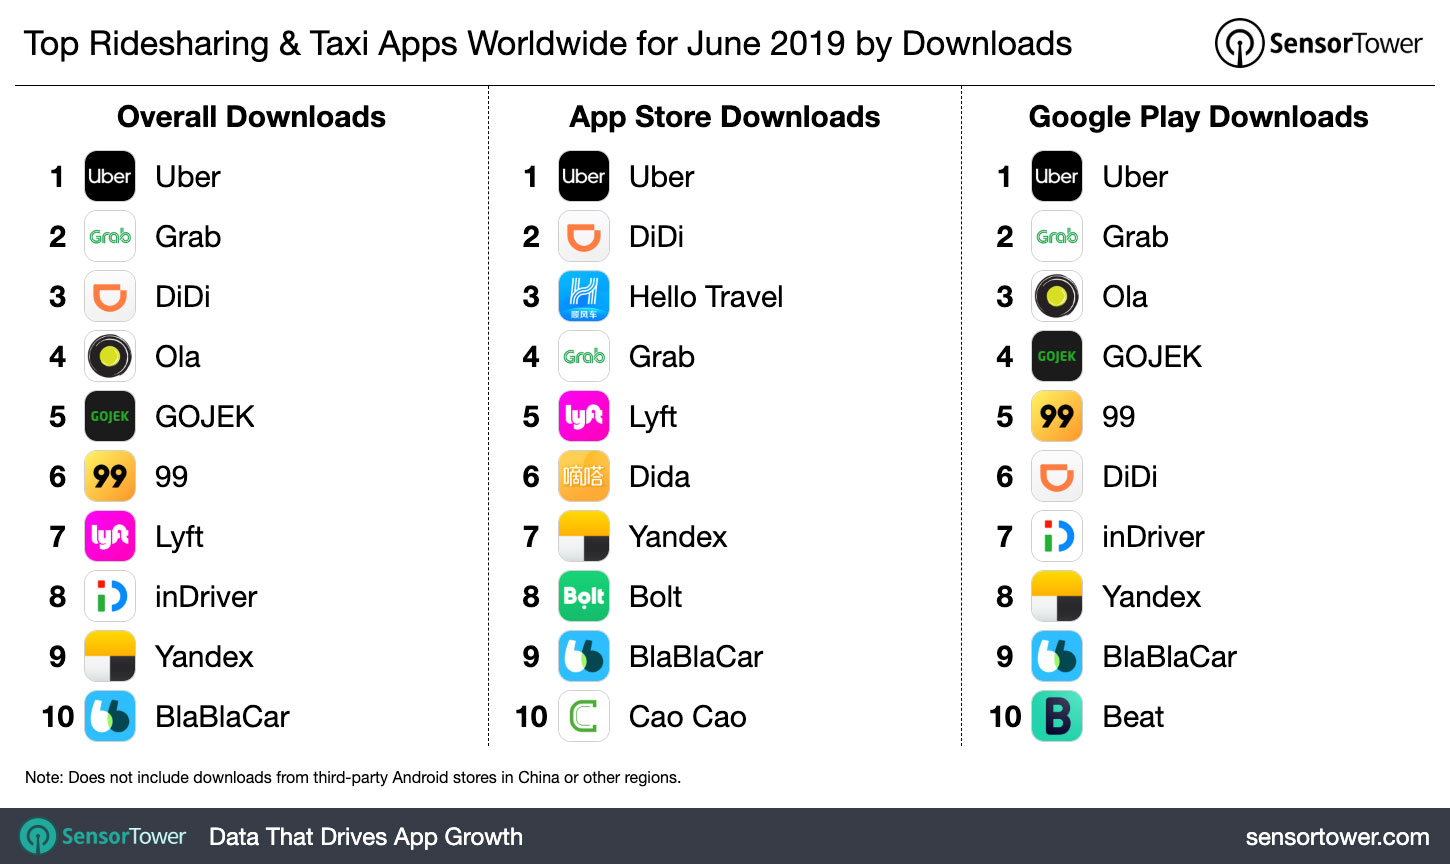 Top Ridesharing & Taxi Apps Worldwide for June 2019 by Downloads